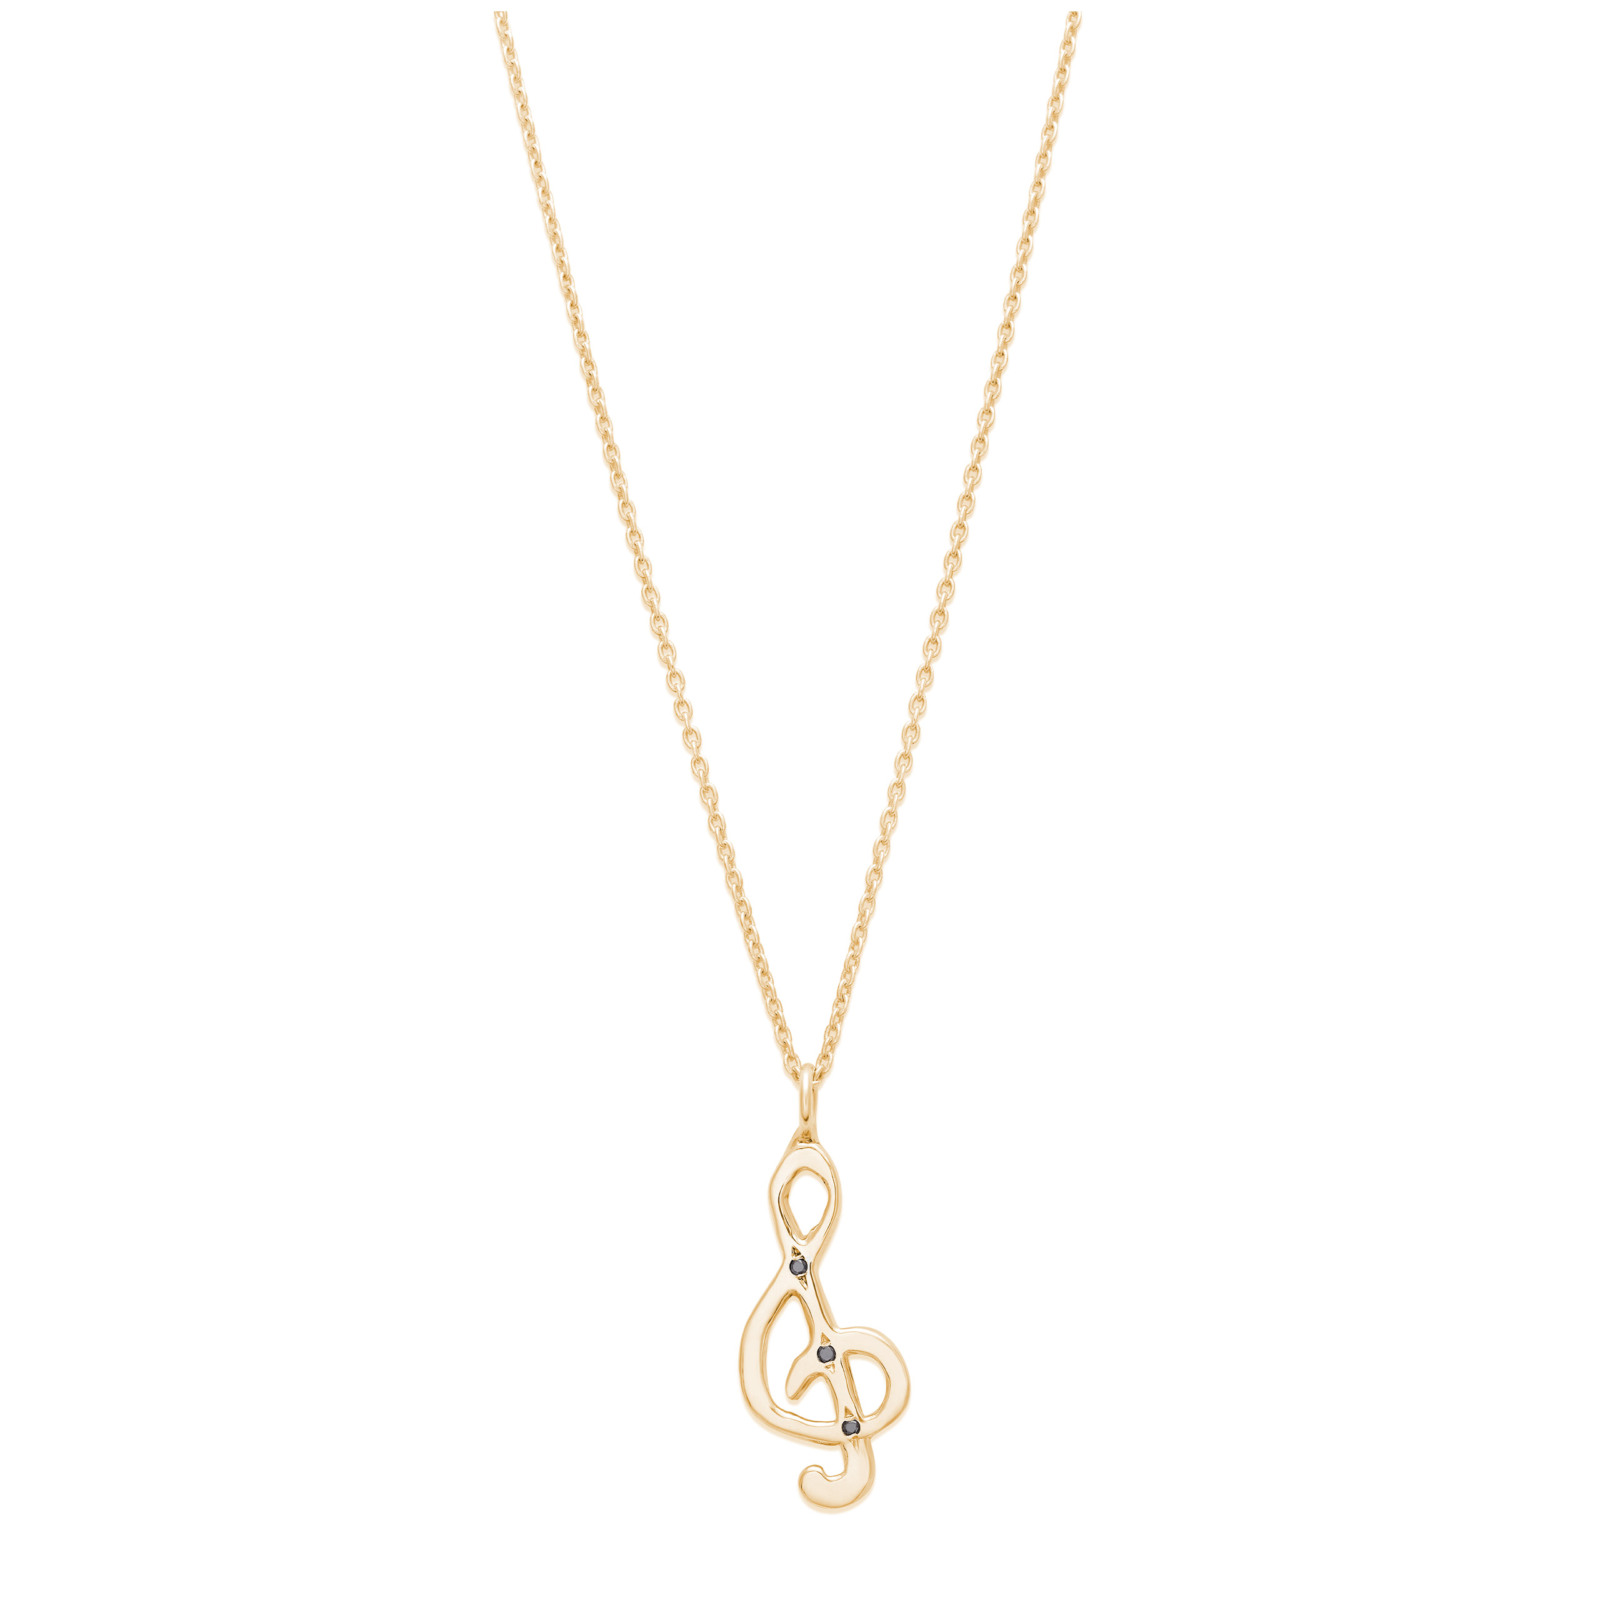 Treble clef music note charm necklace in 14k yellow gold with black diamonds